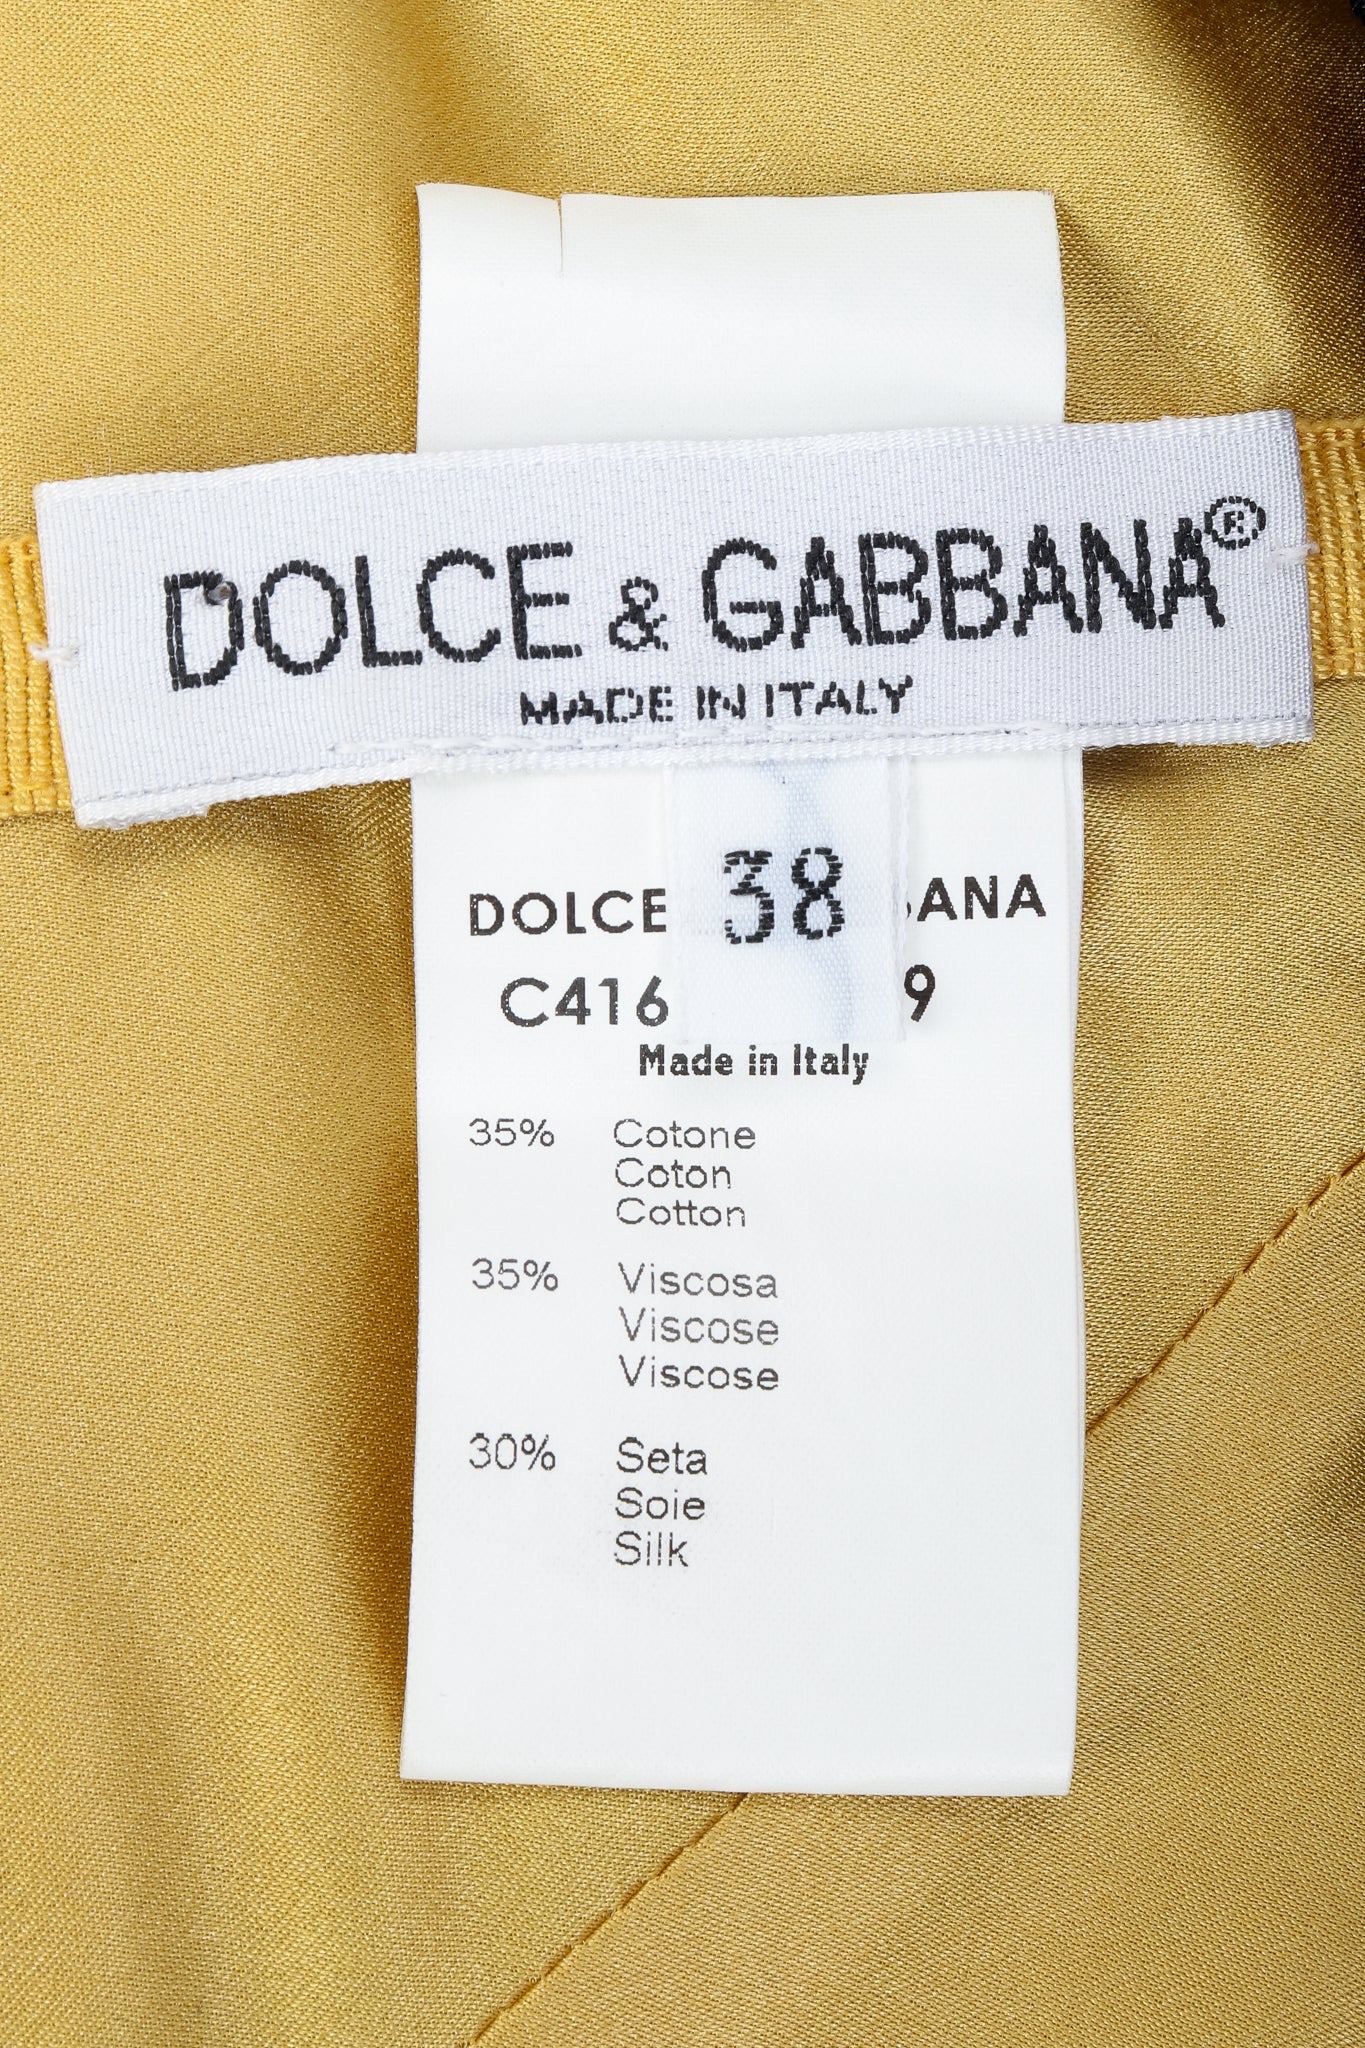 Recess Vintage Dolce & Gabbana label on yellow fabric